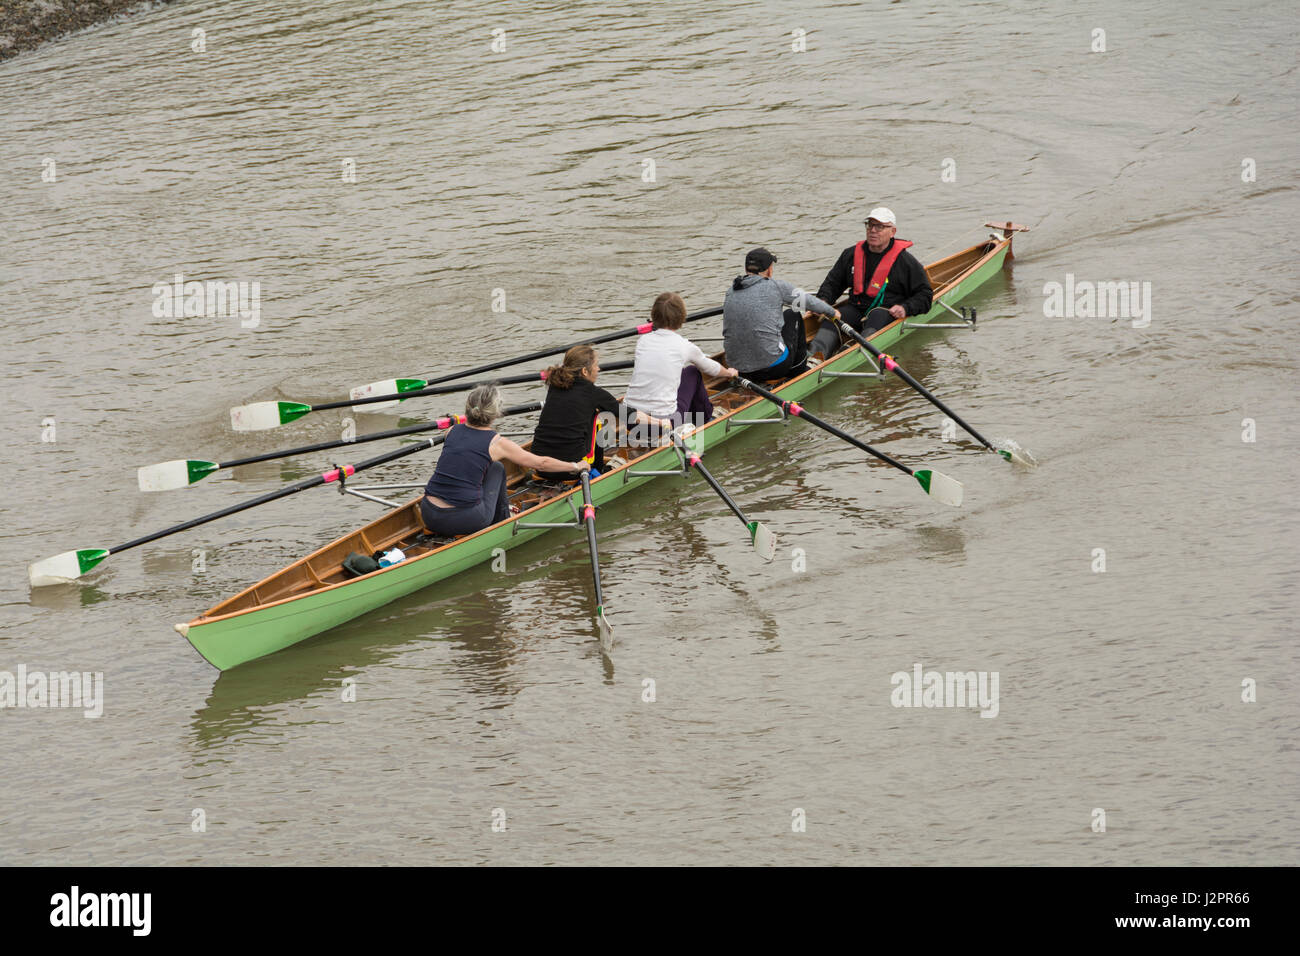 A skiff being rowed on the River Thames in London, England, UK Stock Photo